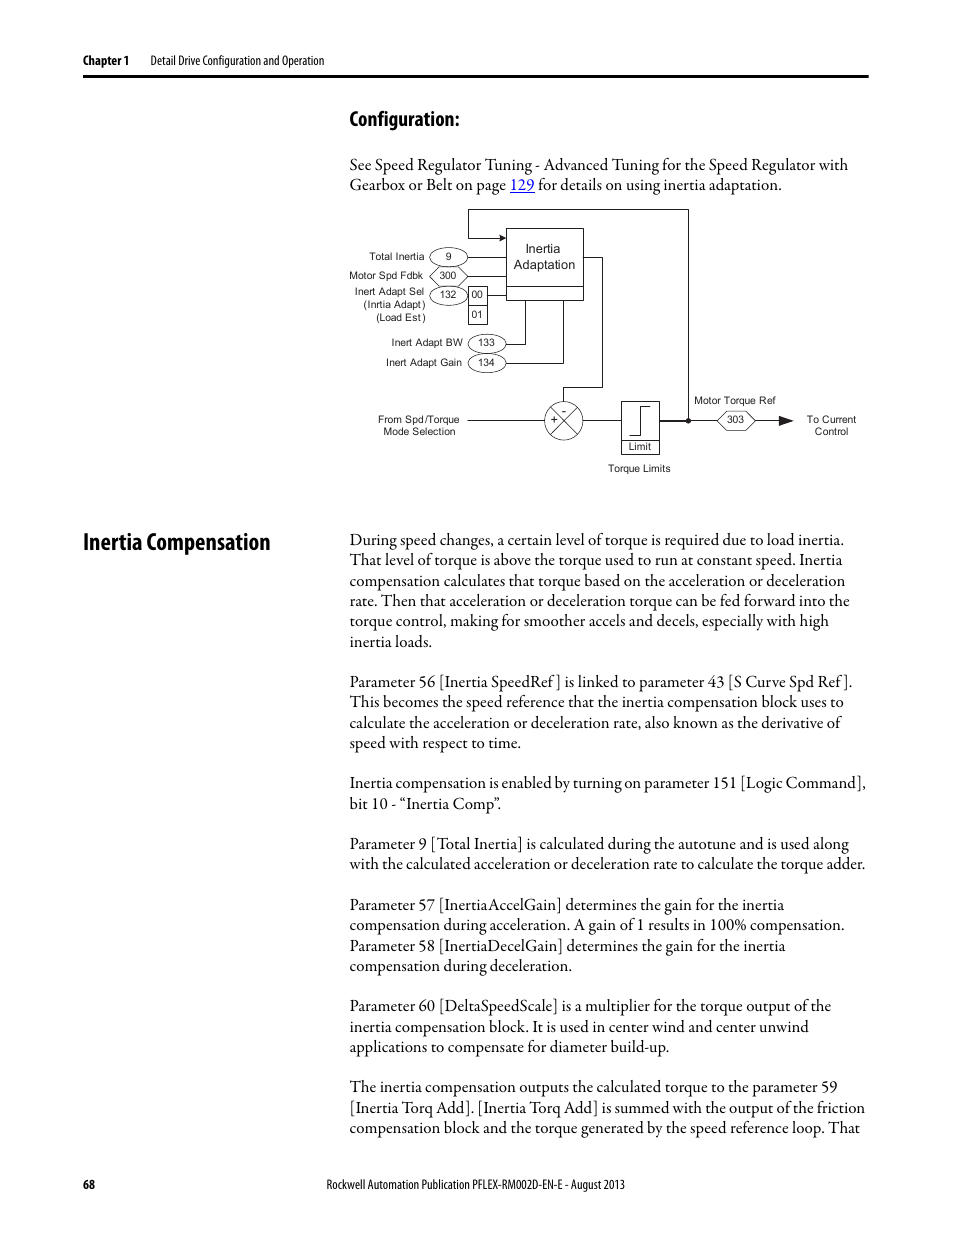 Configuration, Inertia compensation | Rockwell Automation 20D PowerFlex 700S with Phase I Control Reference Manual User Manual | Page 68 / 190